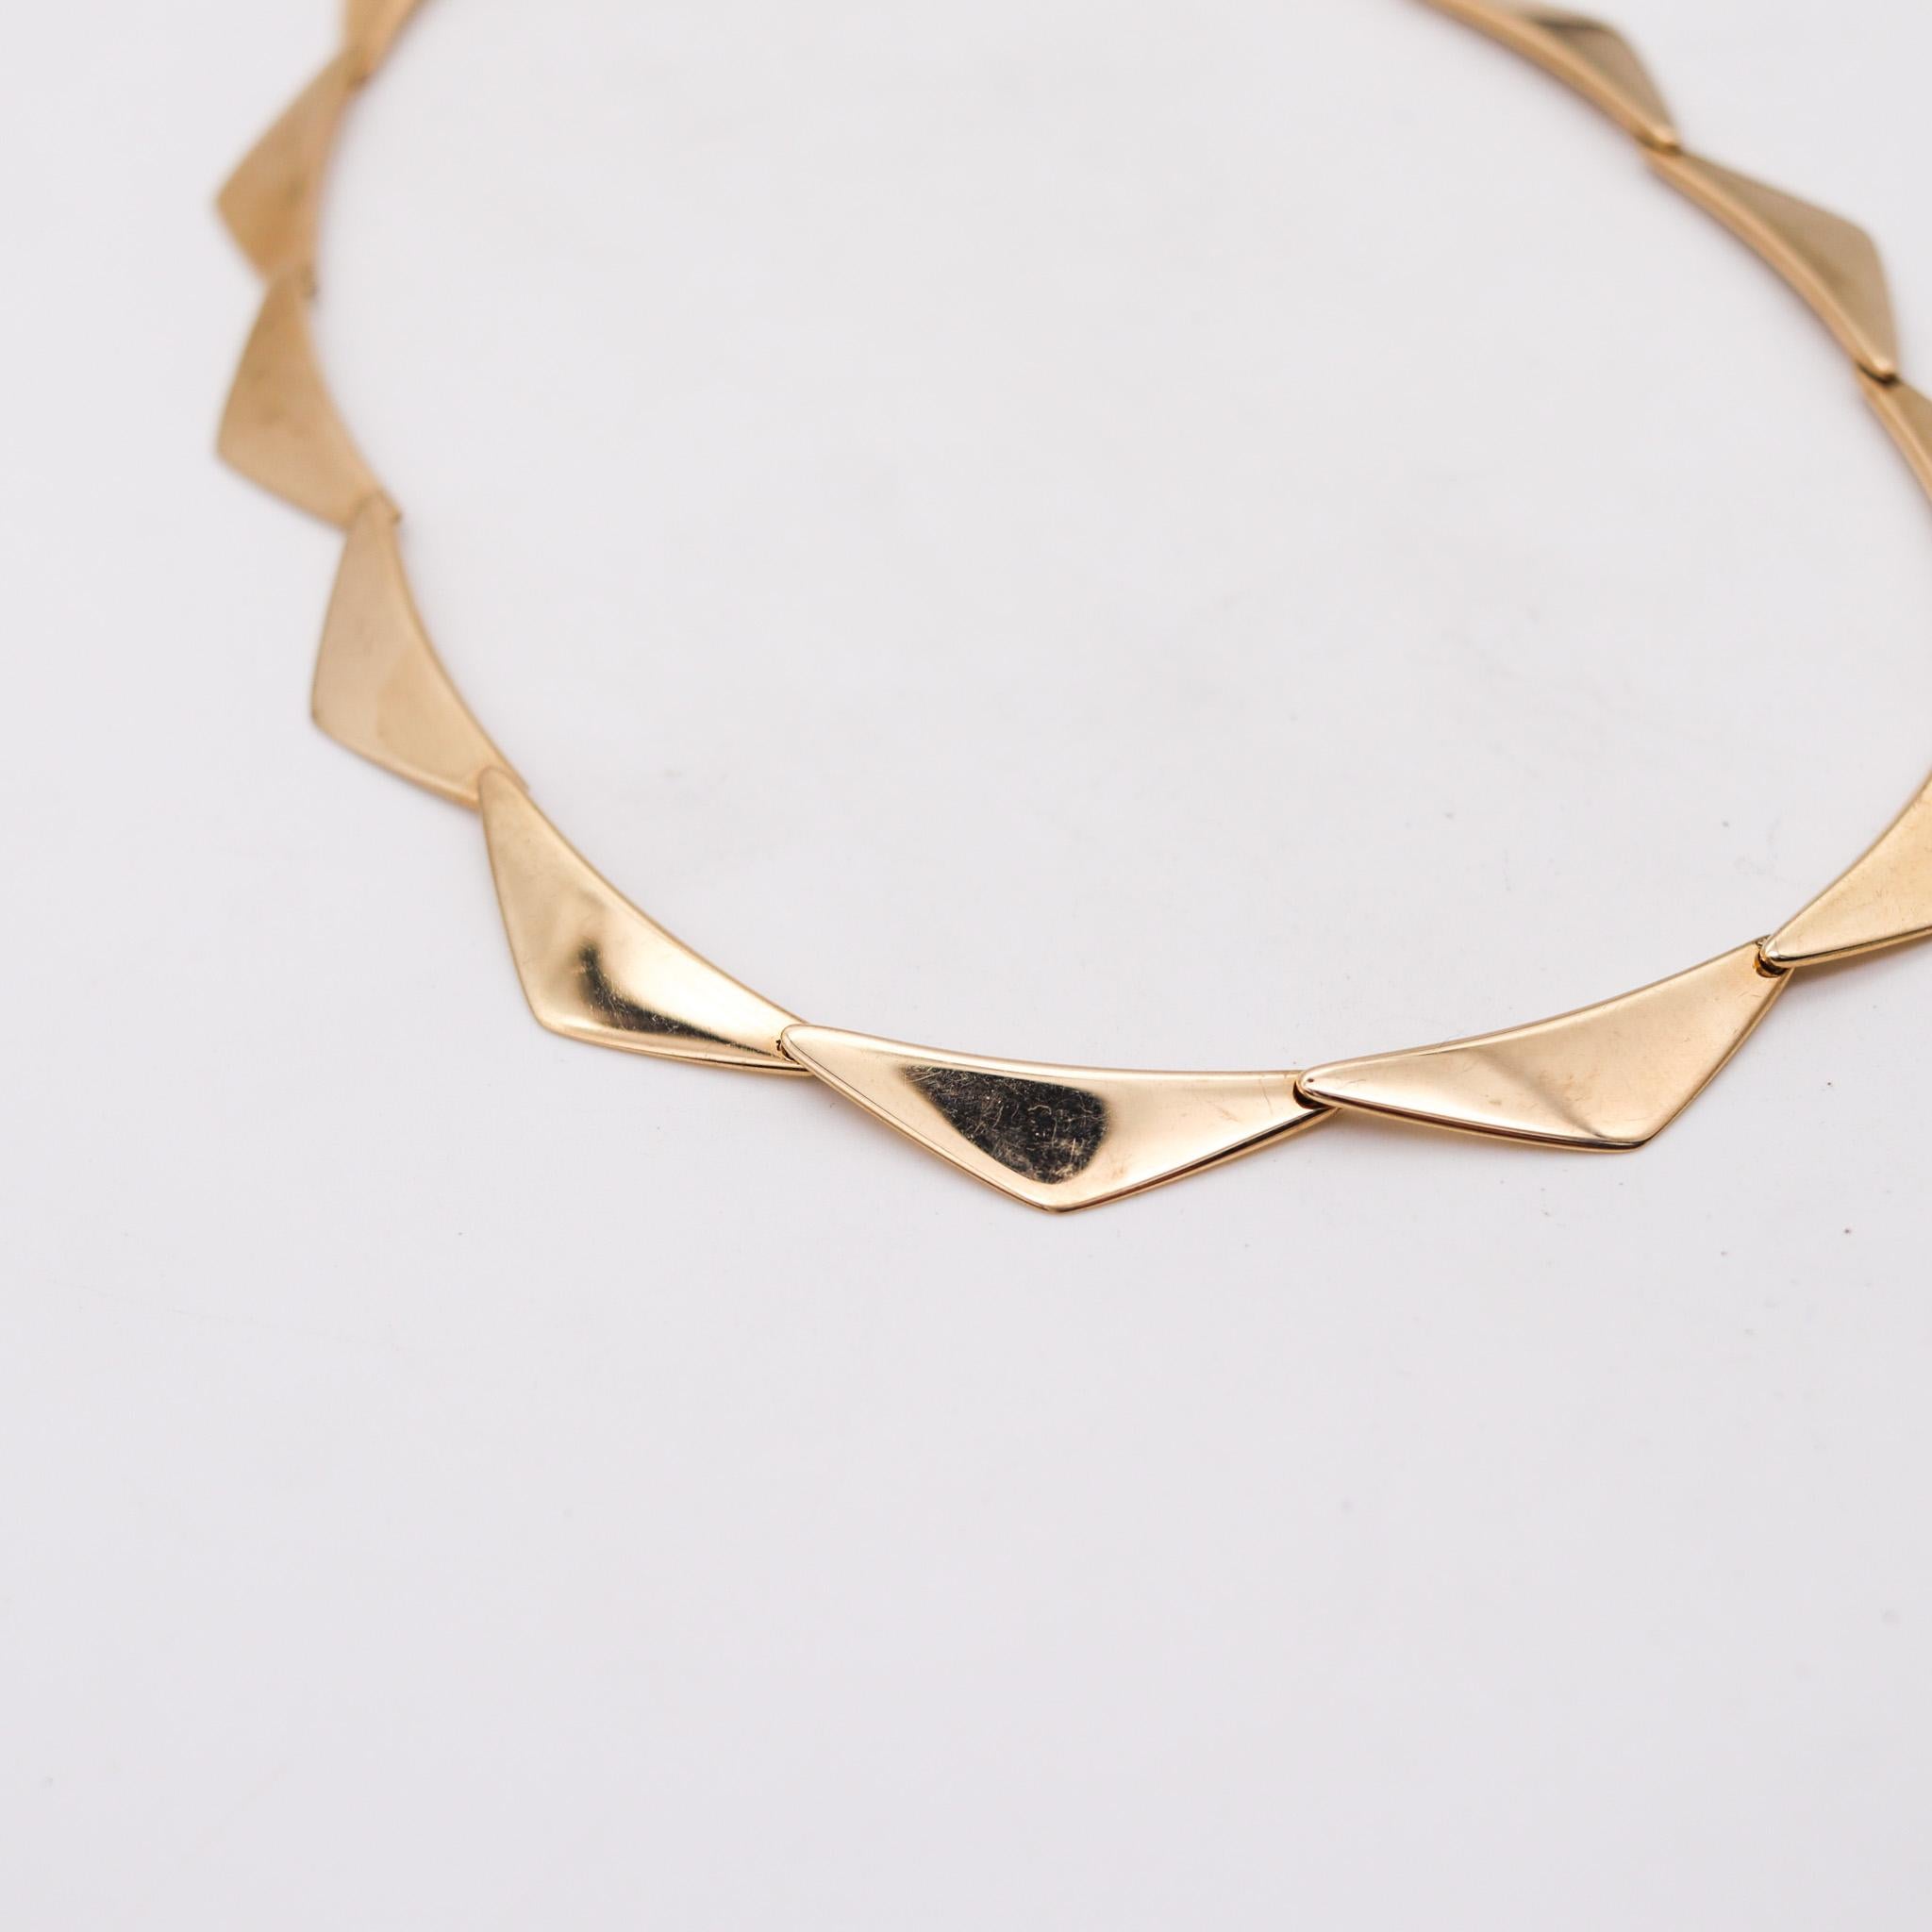 Geometric necklace designed by Bent Gabrielsen for Hans Hansen.

Great sculptural necklace, created in Denmark by the designer Bent Gabrielsen for the jewelry house Hans Hansen Company, back in the 1960. This peak necklace is the model 196 crafted